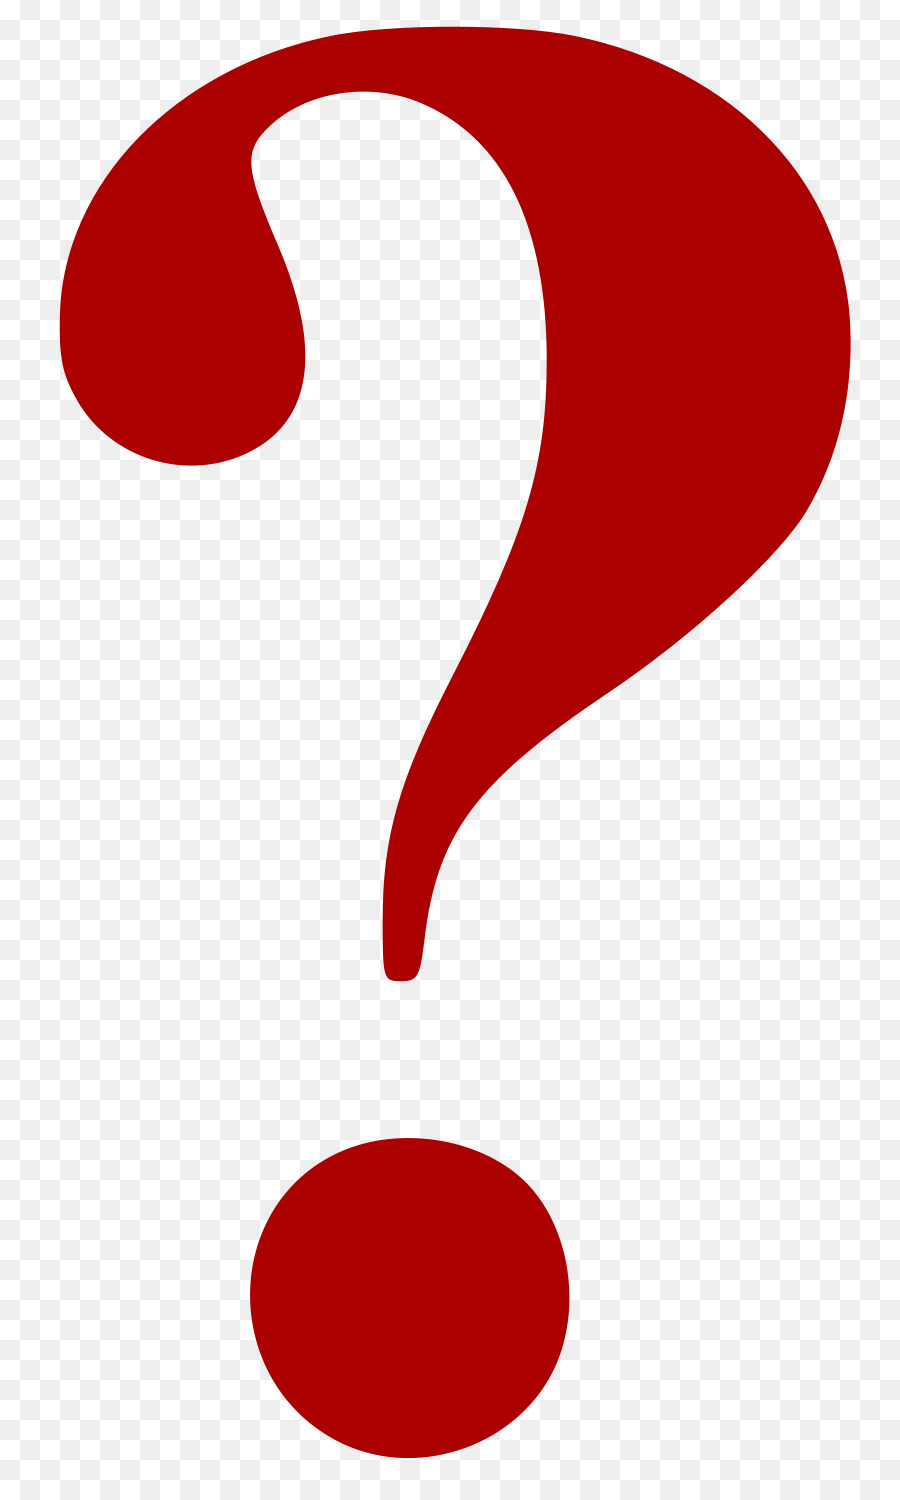 Question mark Clip art - question  icon png download - 823*1489 - Free Transparent Question Mark png Download.